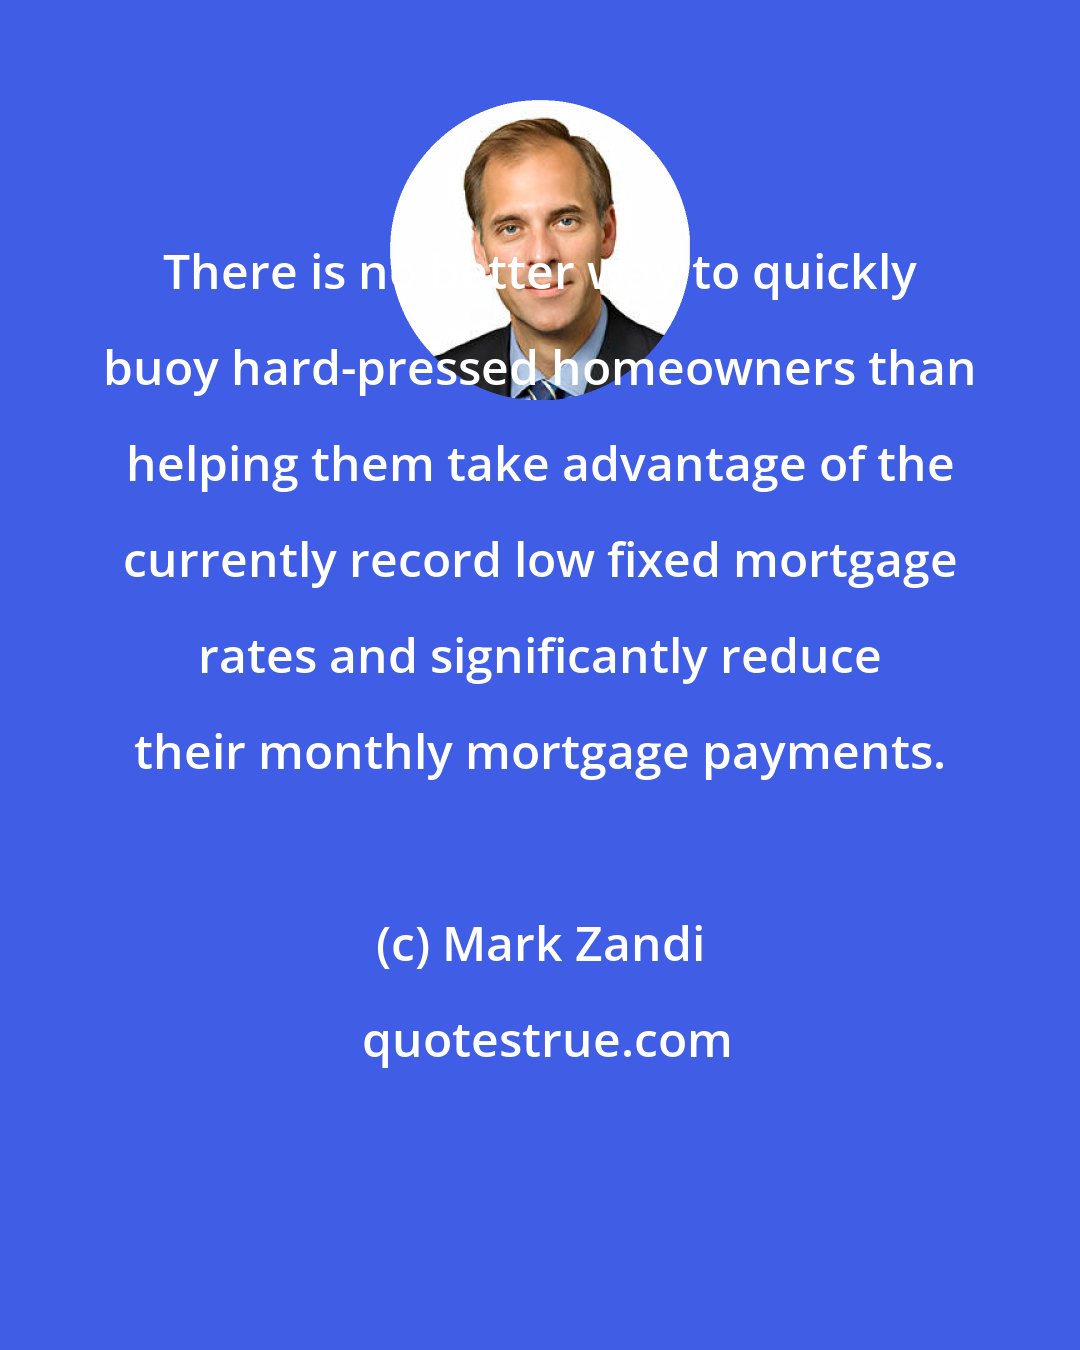 Mark Zandi: There is no better way to quickly buoy hard-pressed homeowners than helping them take advantage of the currently record low fixed mortgage rates and significantly reduce their monthly mortgage payments.